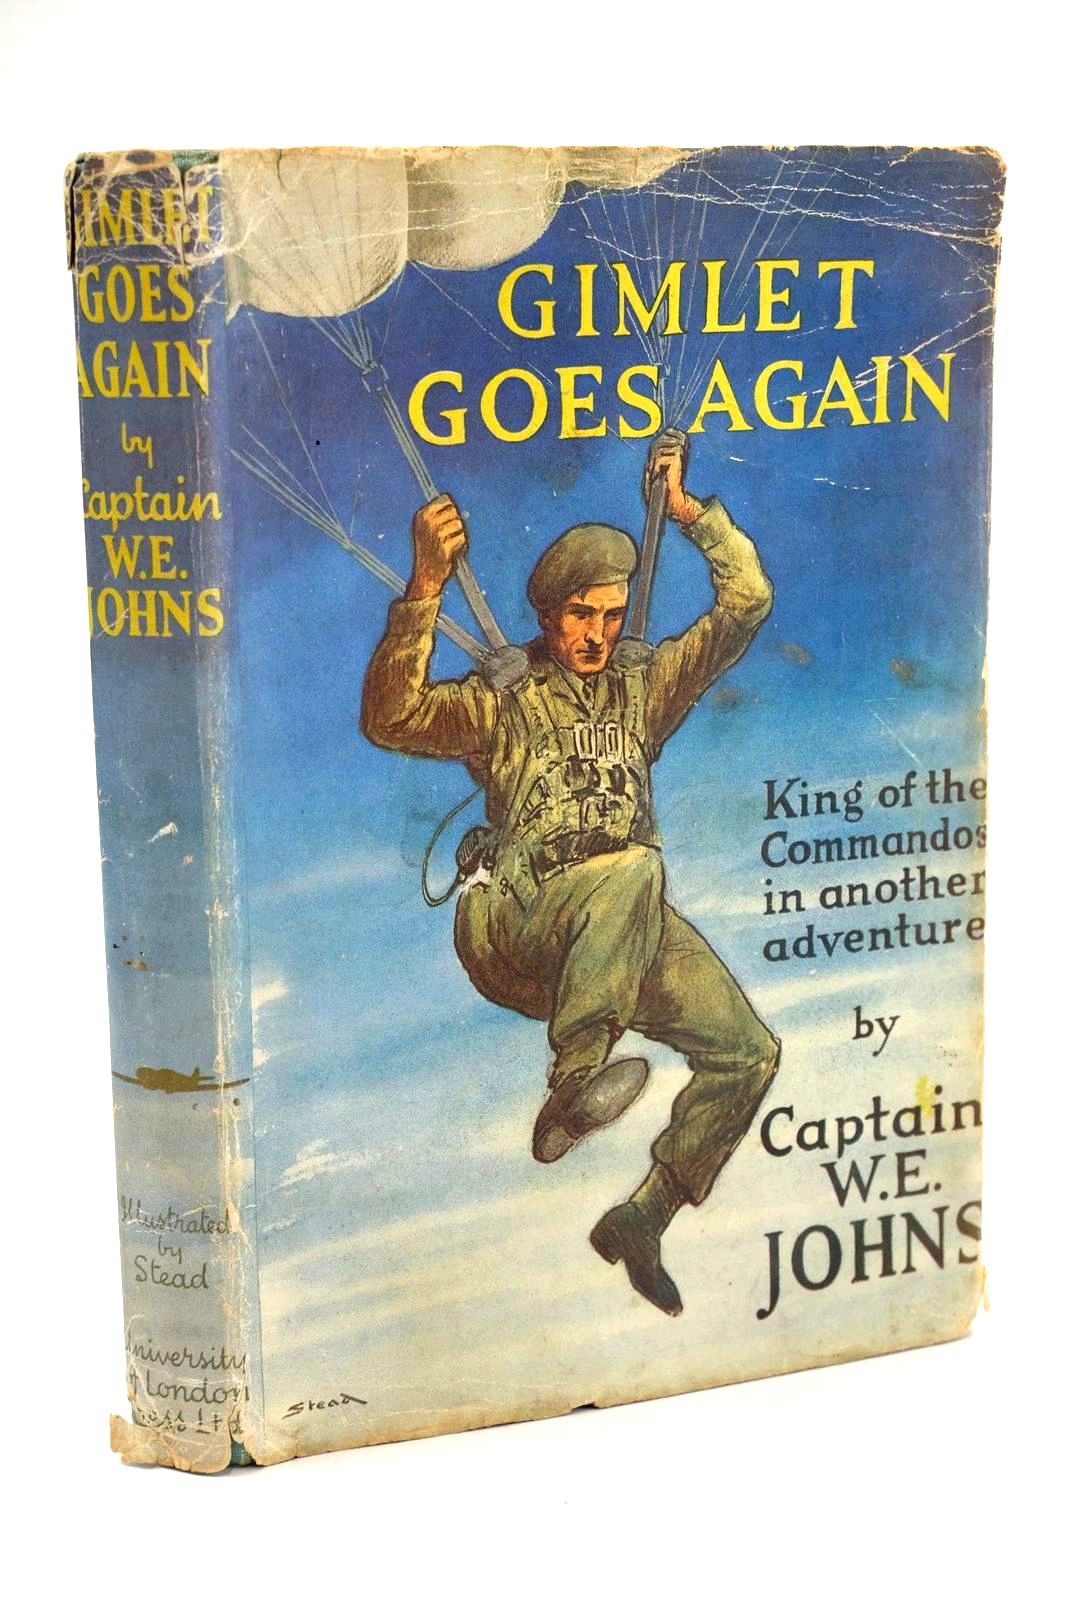 Photo of GIMLET GOES AGAIN written by Johns, W.E. illustrated by Stead,  published by University of London Press (STOCK CODE: 1324282)  for sale by Stella & Rose's Books